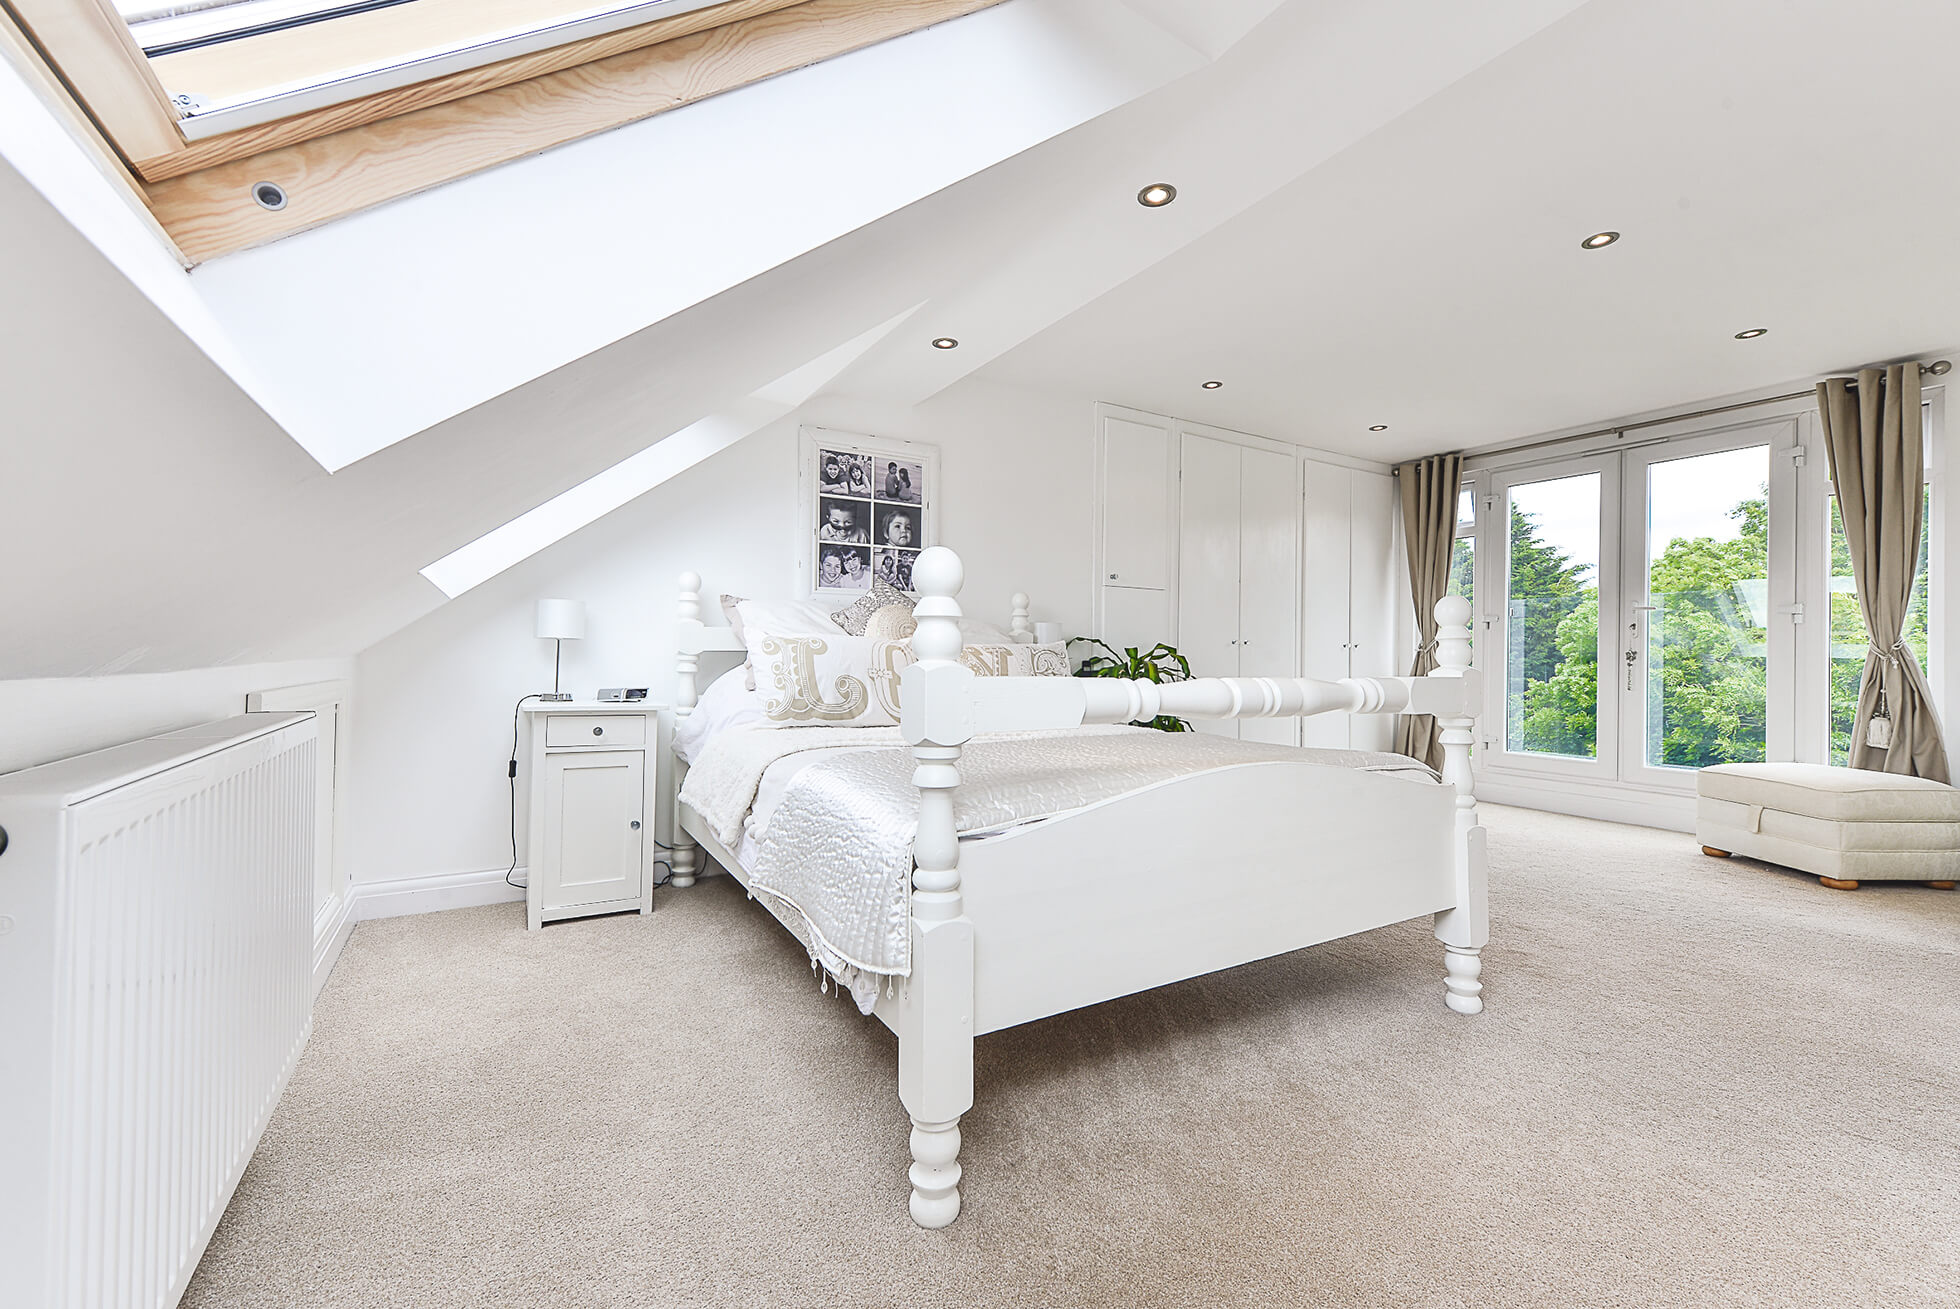 Do you have a question about converting your Loft in Letchmore Heath? Here are the most popular questions asked by our clients.